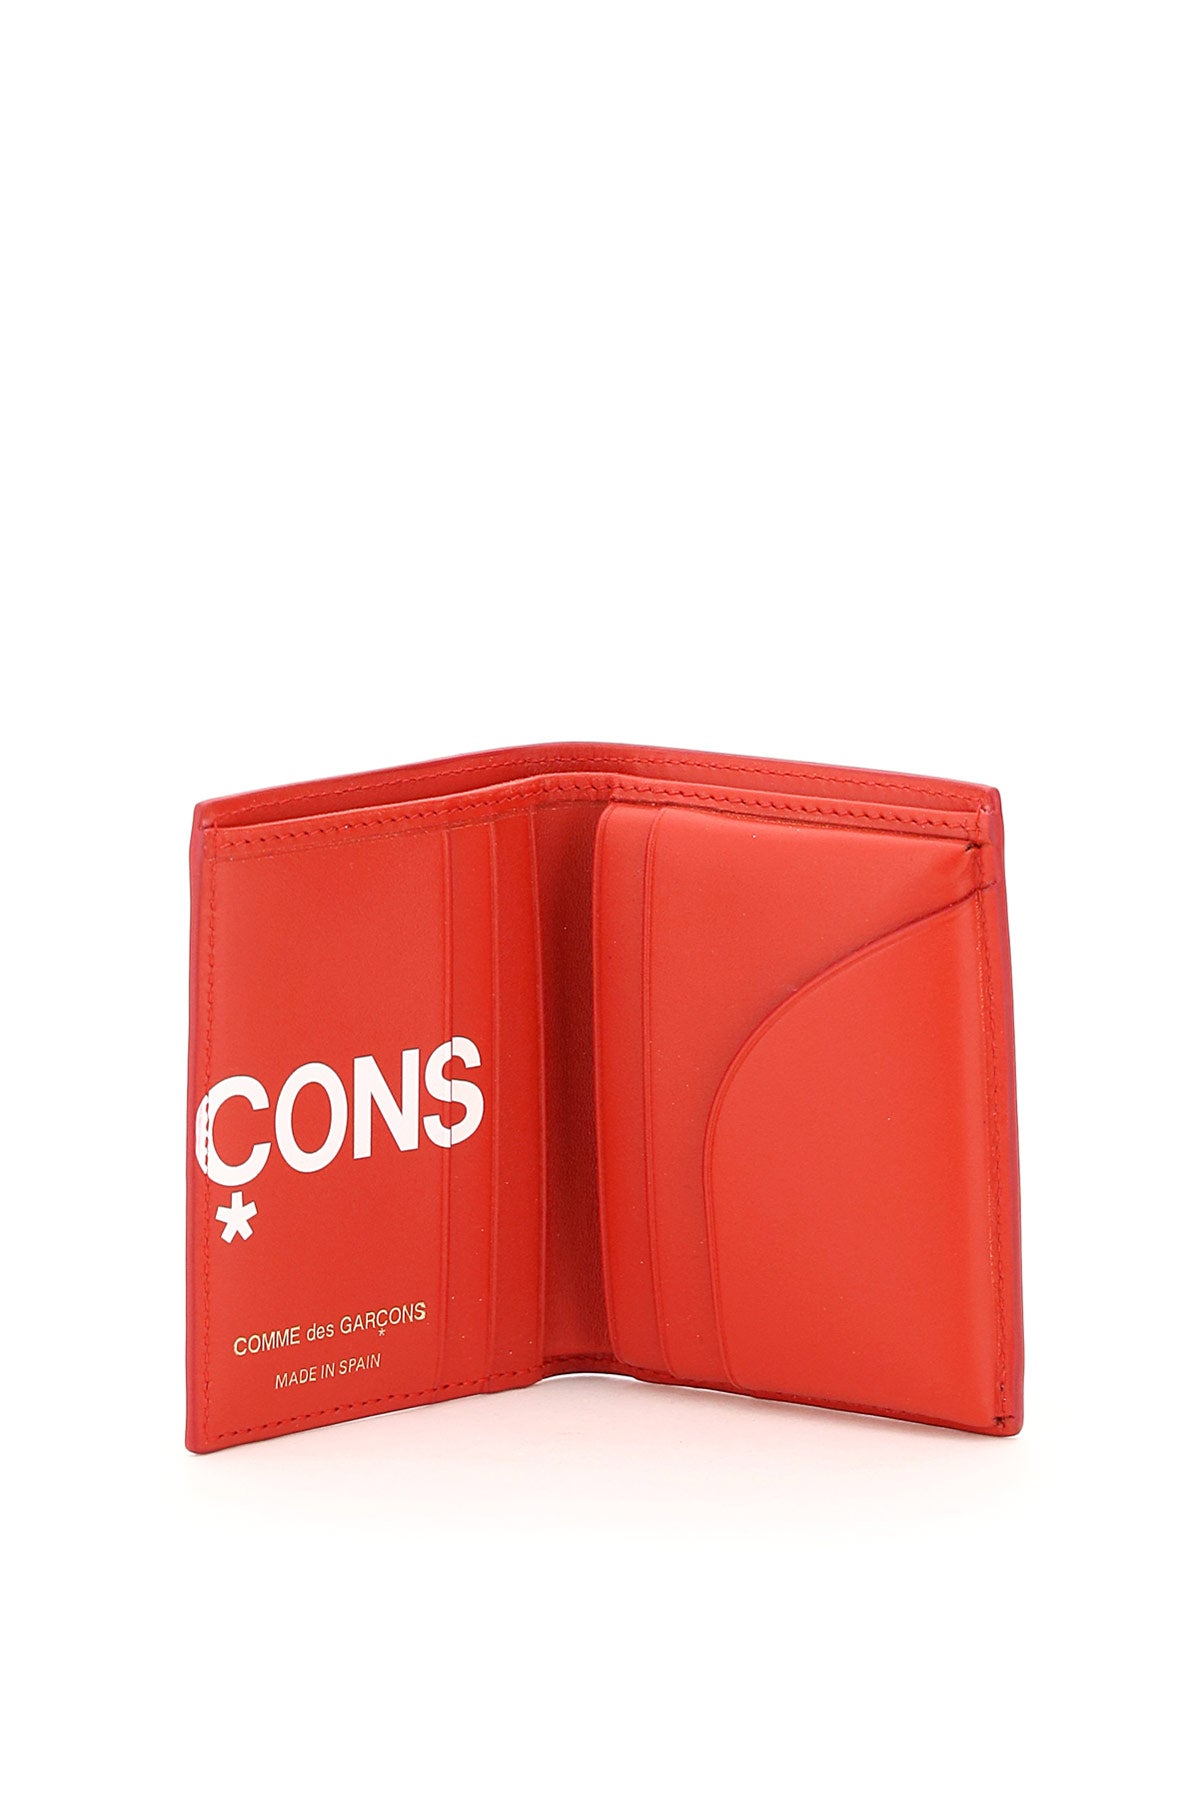 Comme des garcons wallet small bifold wallet with huge logo-1